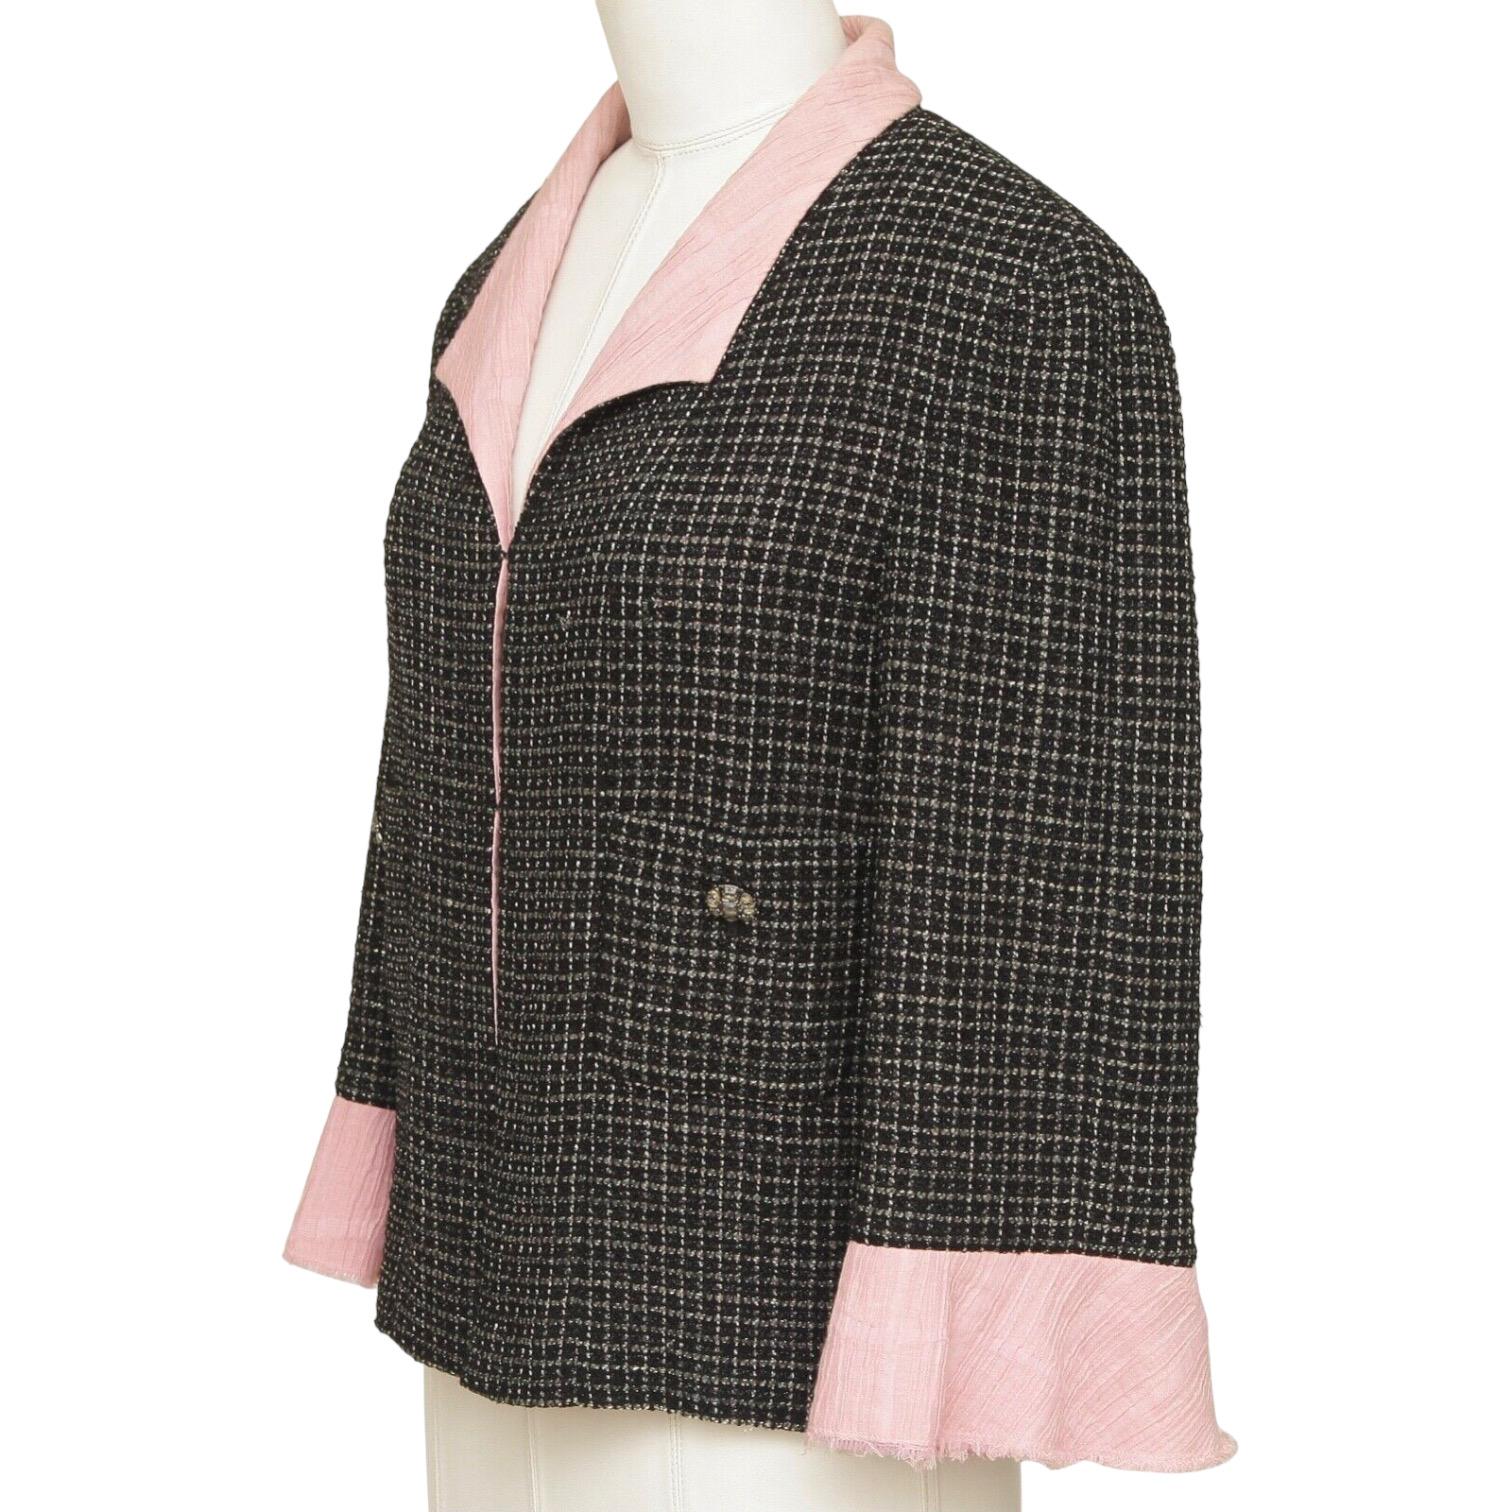 CHANEL Jacket Blazer Coat Tweed Black Iridescent Pink Gripoix Button Sz 40 2012 In Good Condition For Sale In Hollywood, FL